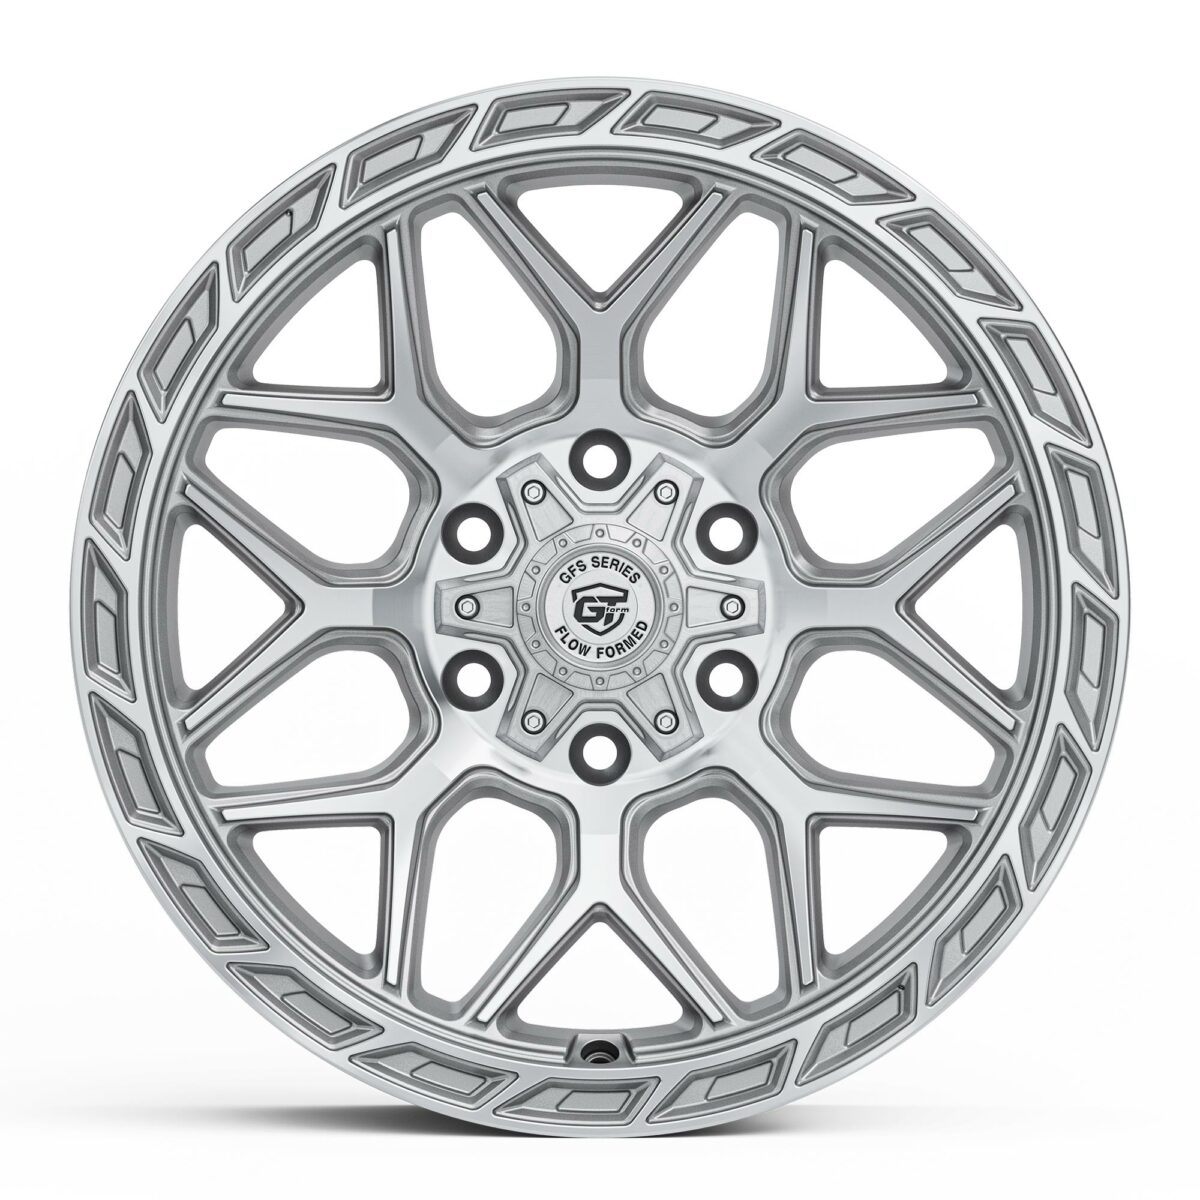 4X4 WHEELS GT FORM GFS4 SILVER MACHINED FACE 18 20 INCH OFFROAD RIMS FOR 4WD SUV